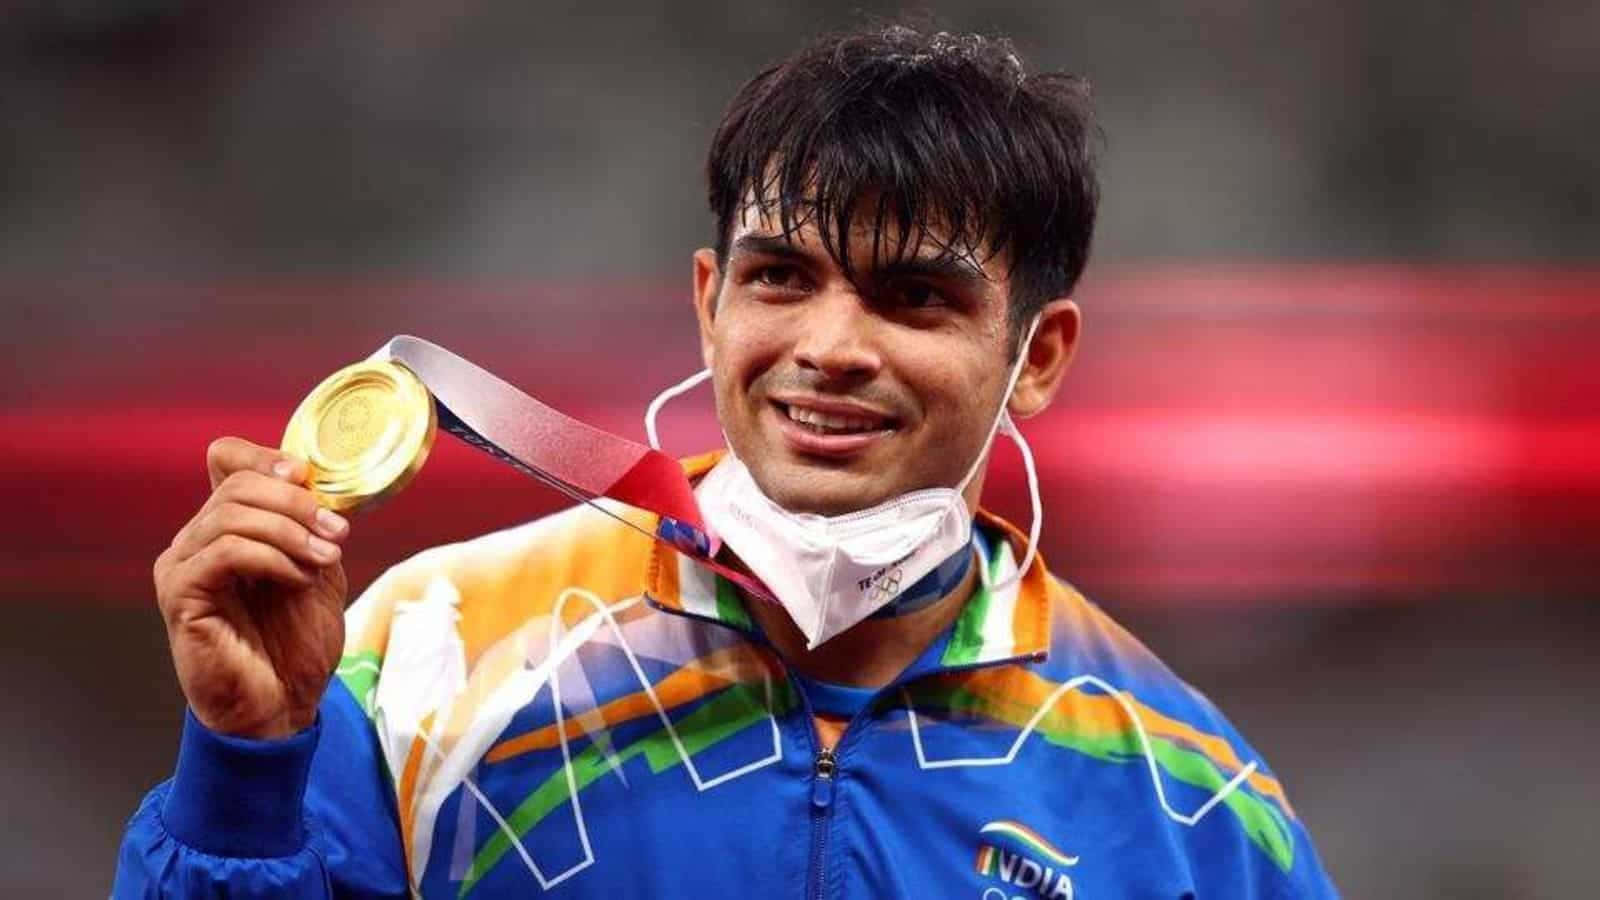 Neeraj Chopra, India's ace javelin thrower and Asian Games gold medalist